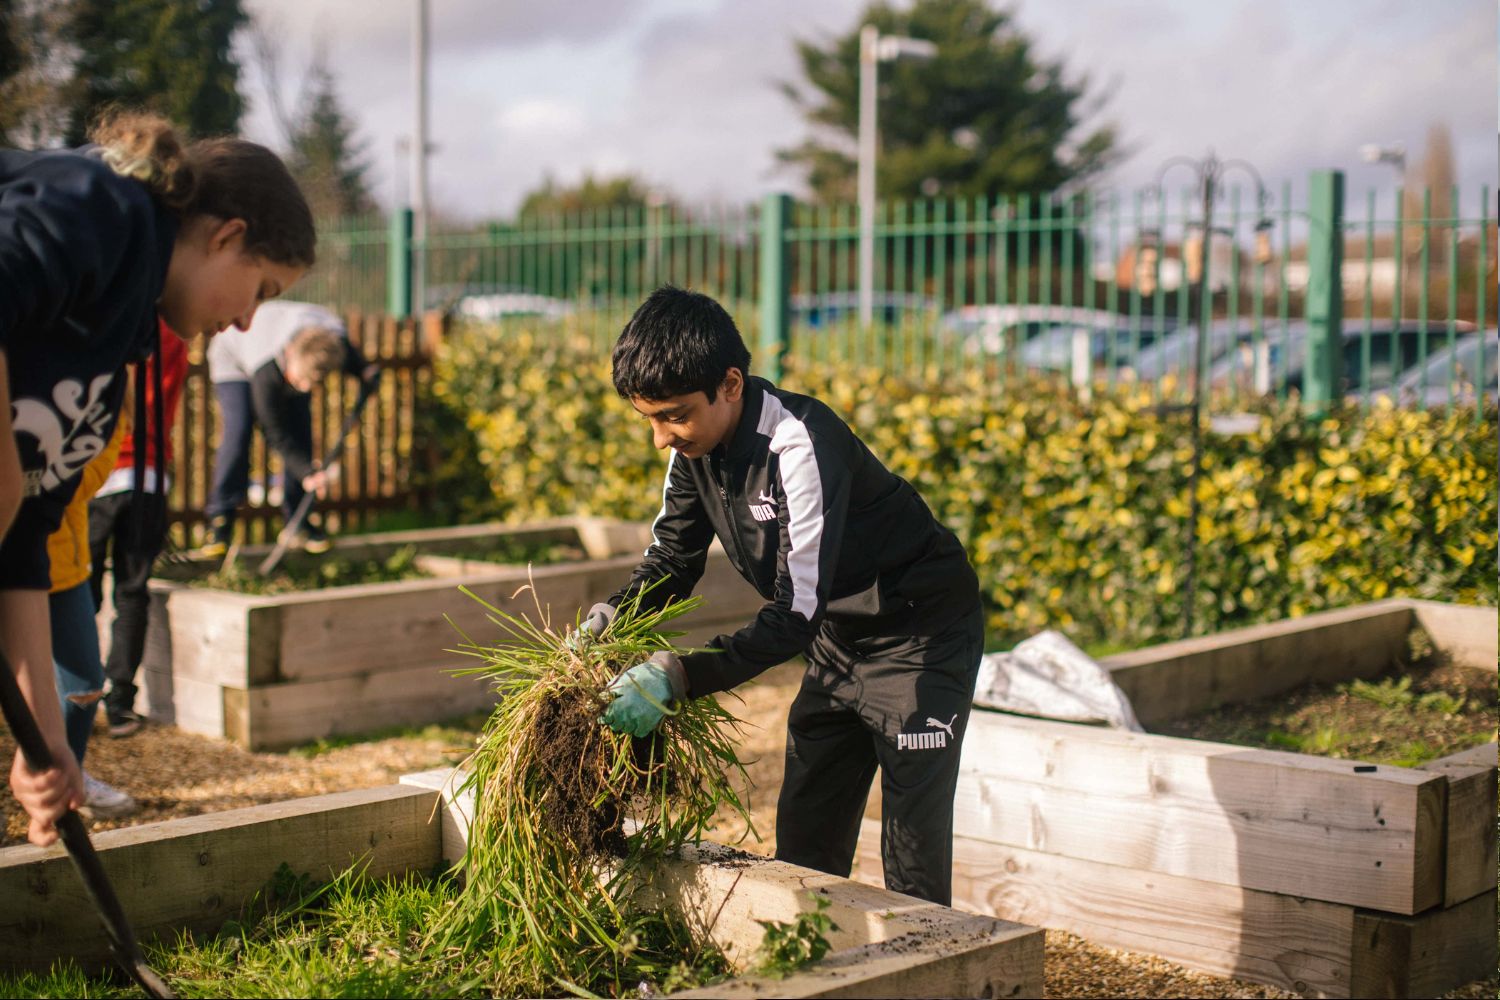 A young boy in a black track suit is holding green grass in his hands as he works with an adult on a raised planting bed.